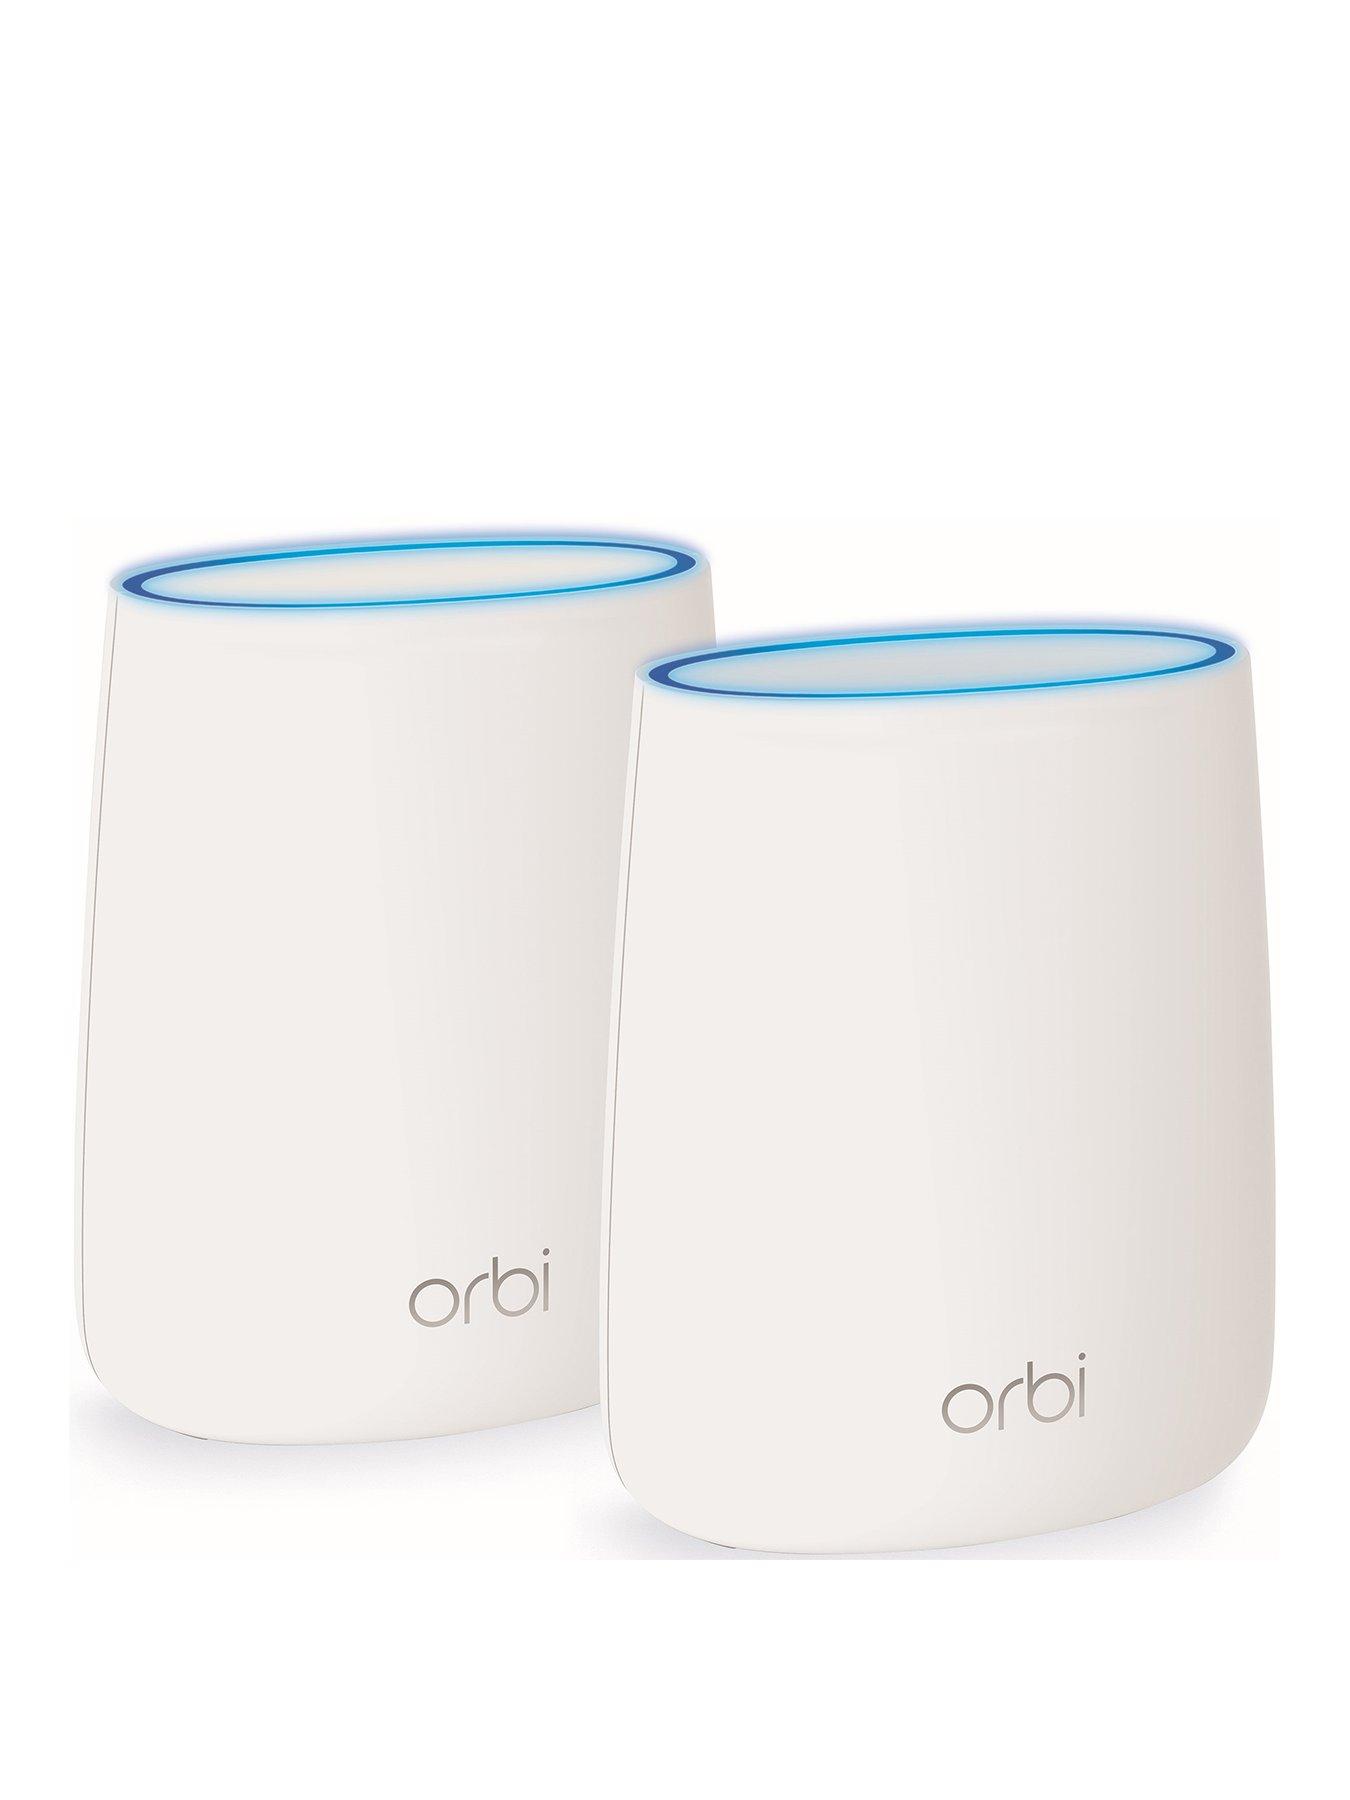 Netgear Rbk20 Orbi Whole Home Mesh Wi-Fi System (Up To 3000 Sq Ft Coverage), Tri-Band Ac2200 (2.2 Gbps)